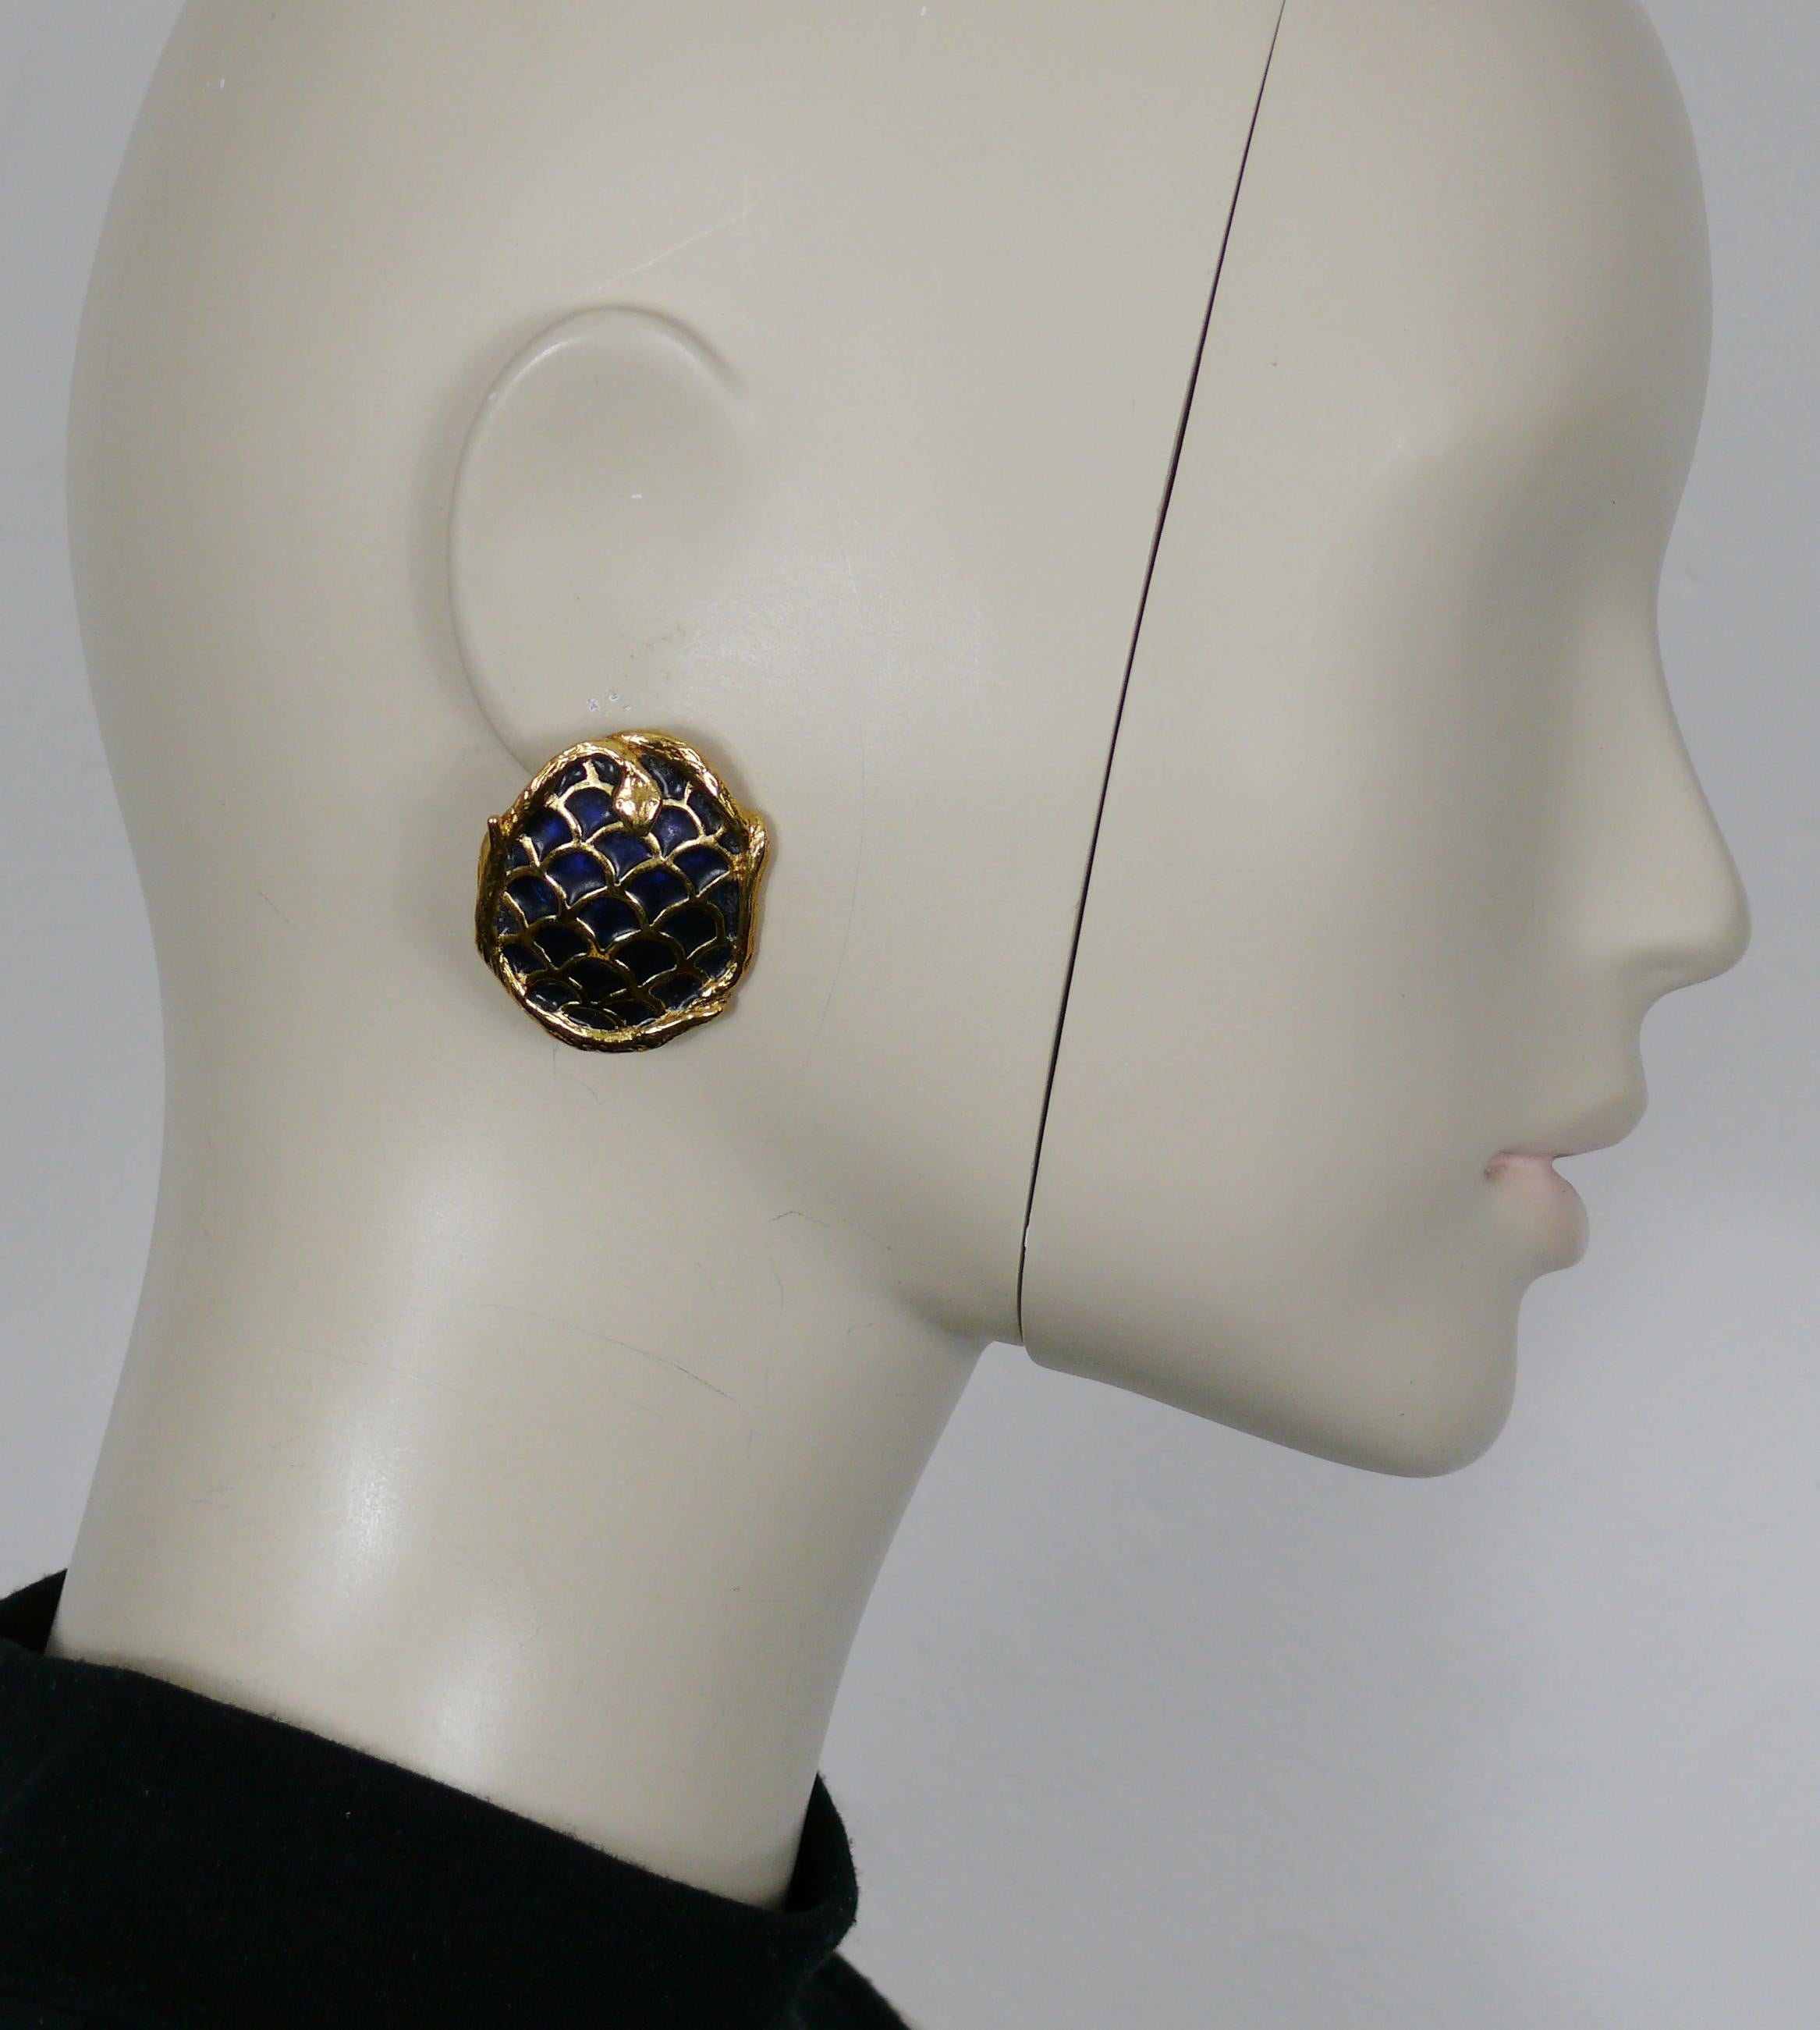 YVES SAINT LAURENT vintage gold tone clip-on earrings featuring a blue enamel scale design adorned with coiled snake/serpent.

Embossed YSL Made in France.

Indicative measurements : max. height approx. 3.5 cm (1.38 inches) / max. width approx. 2.9